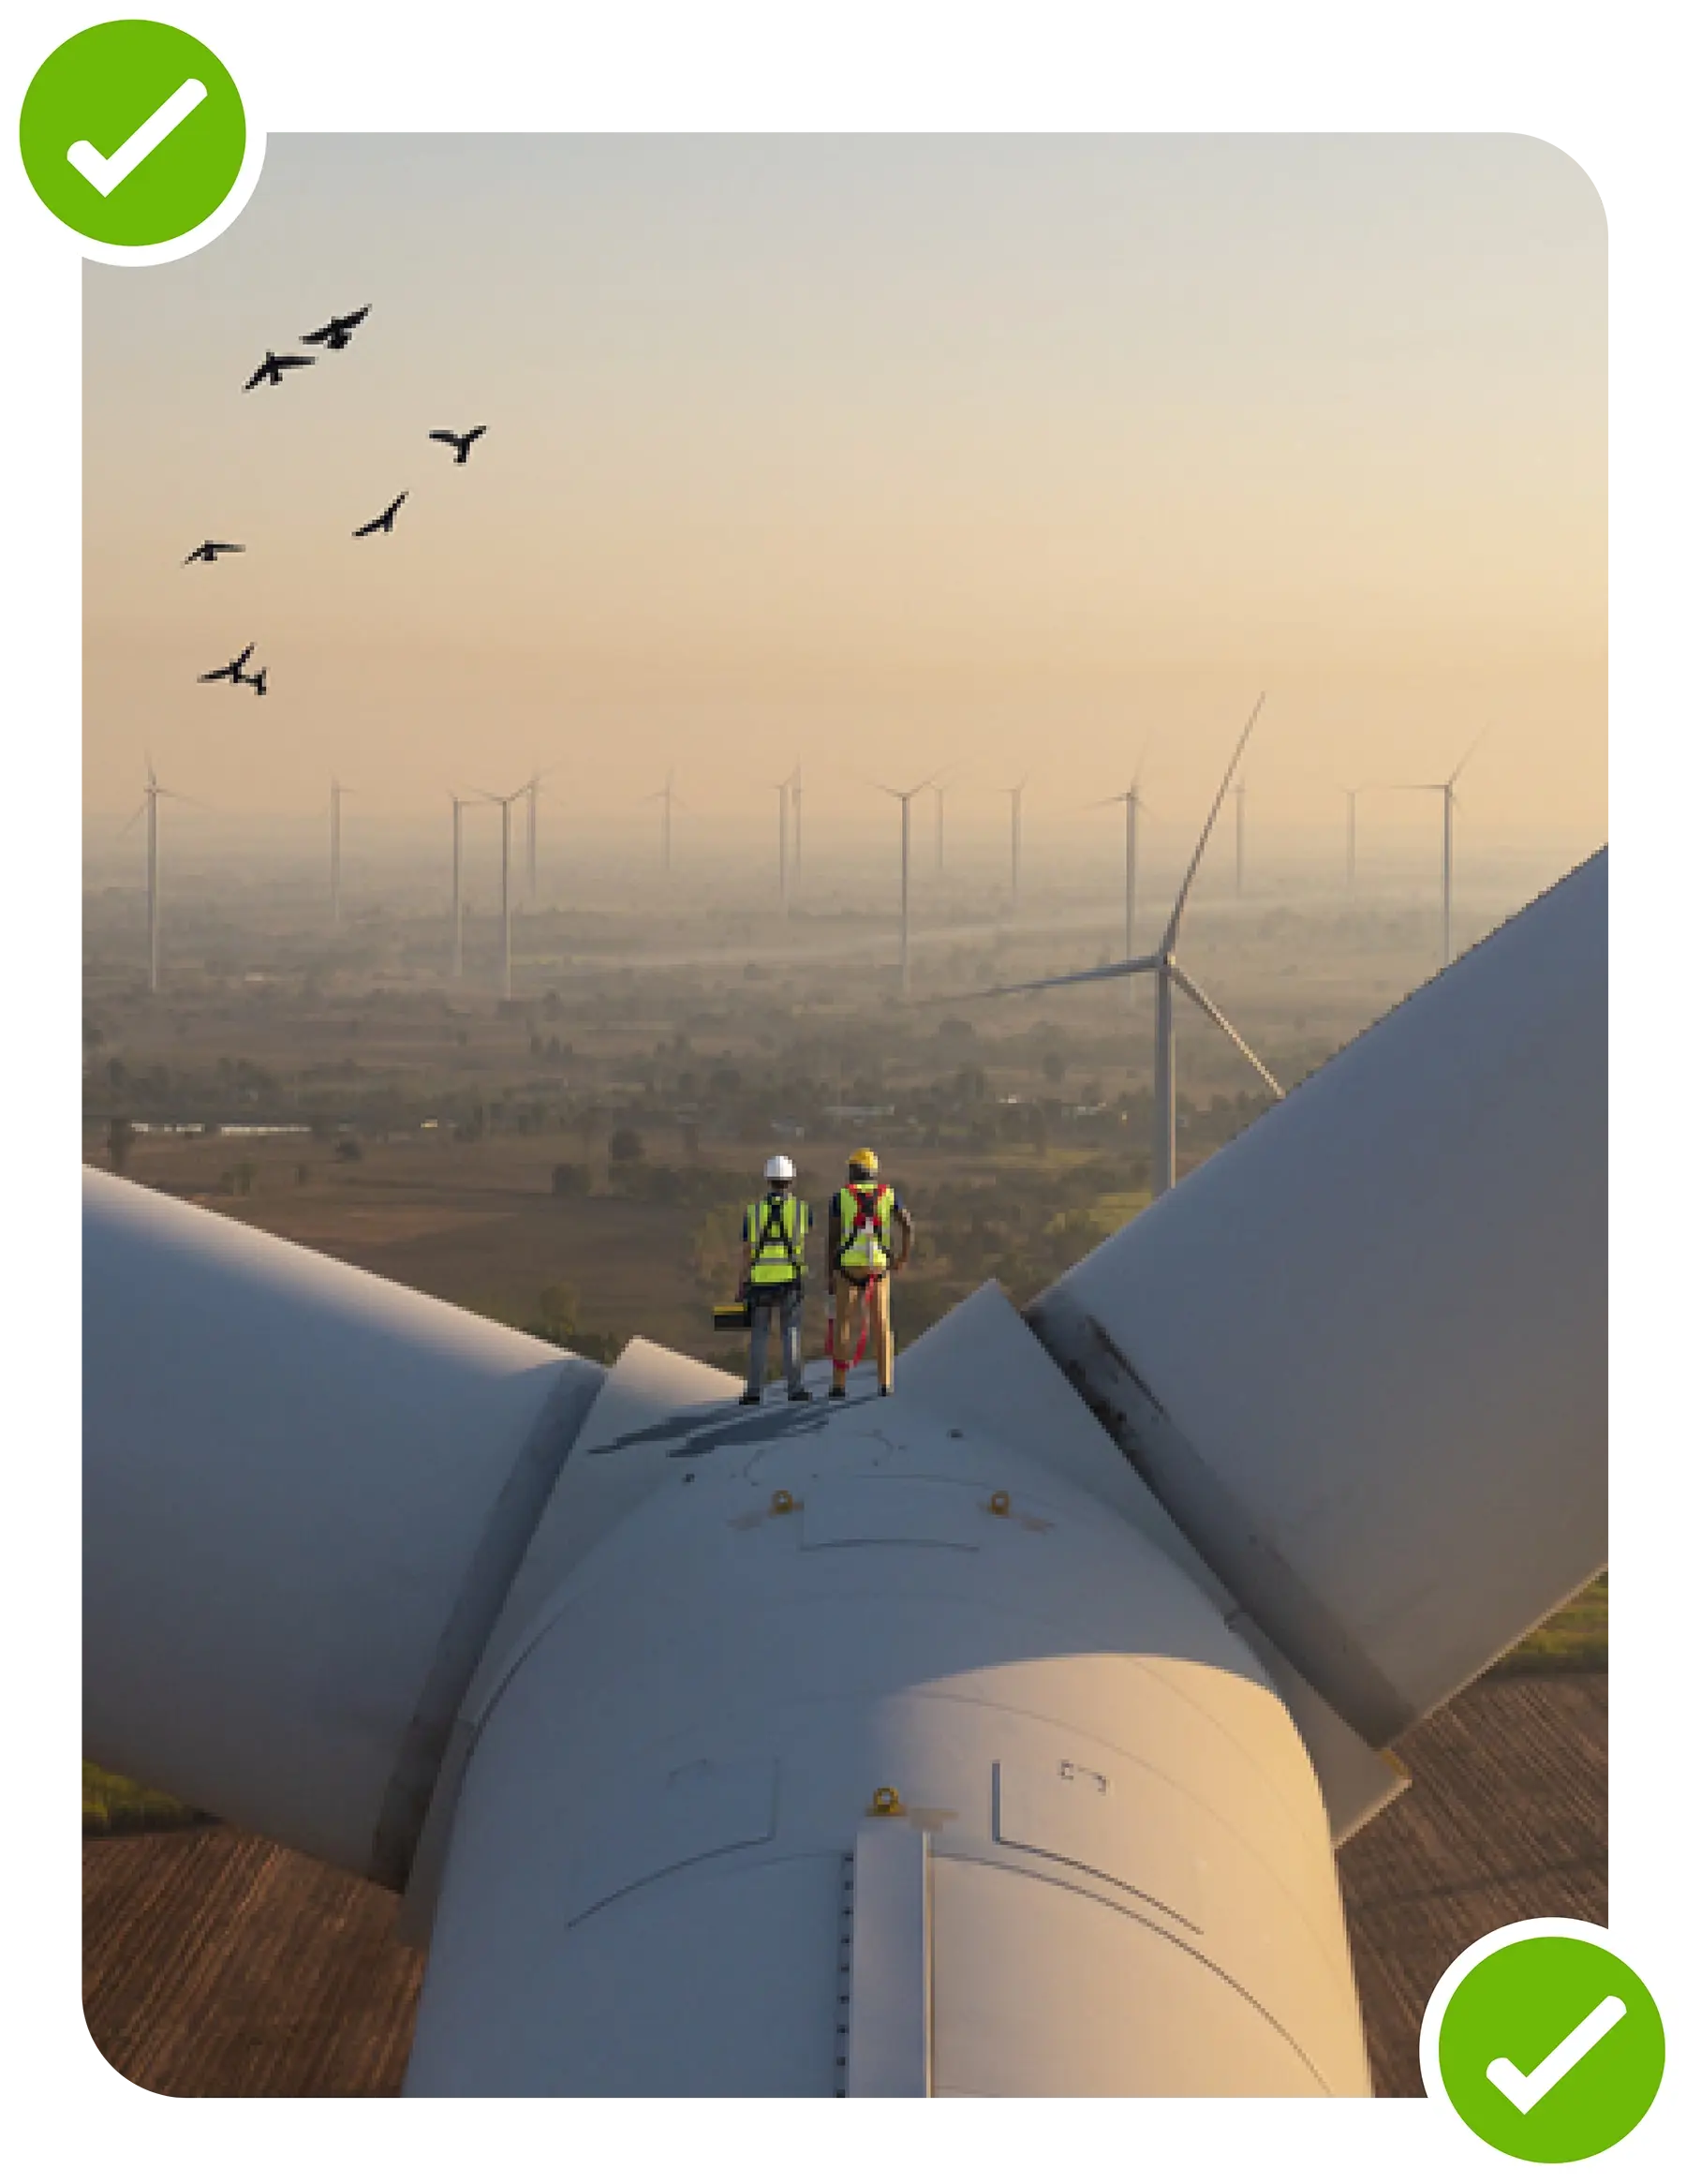 An image of two people standing on top of a wind turbine.